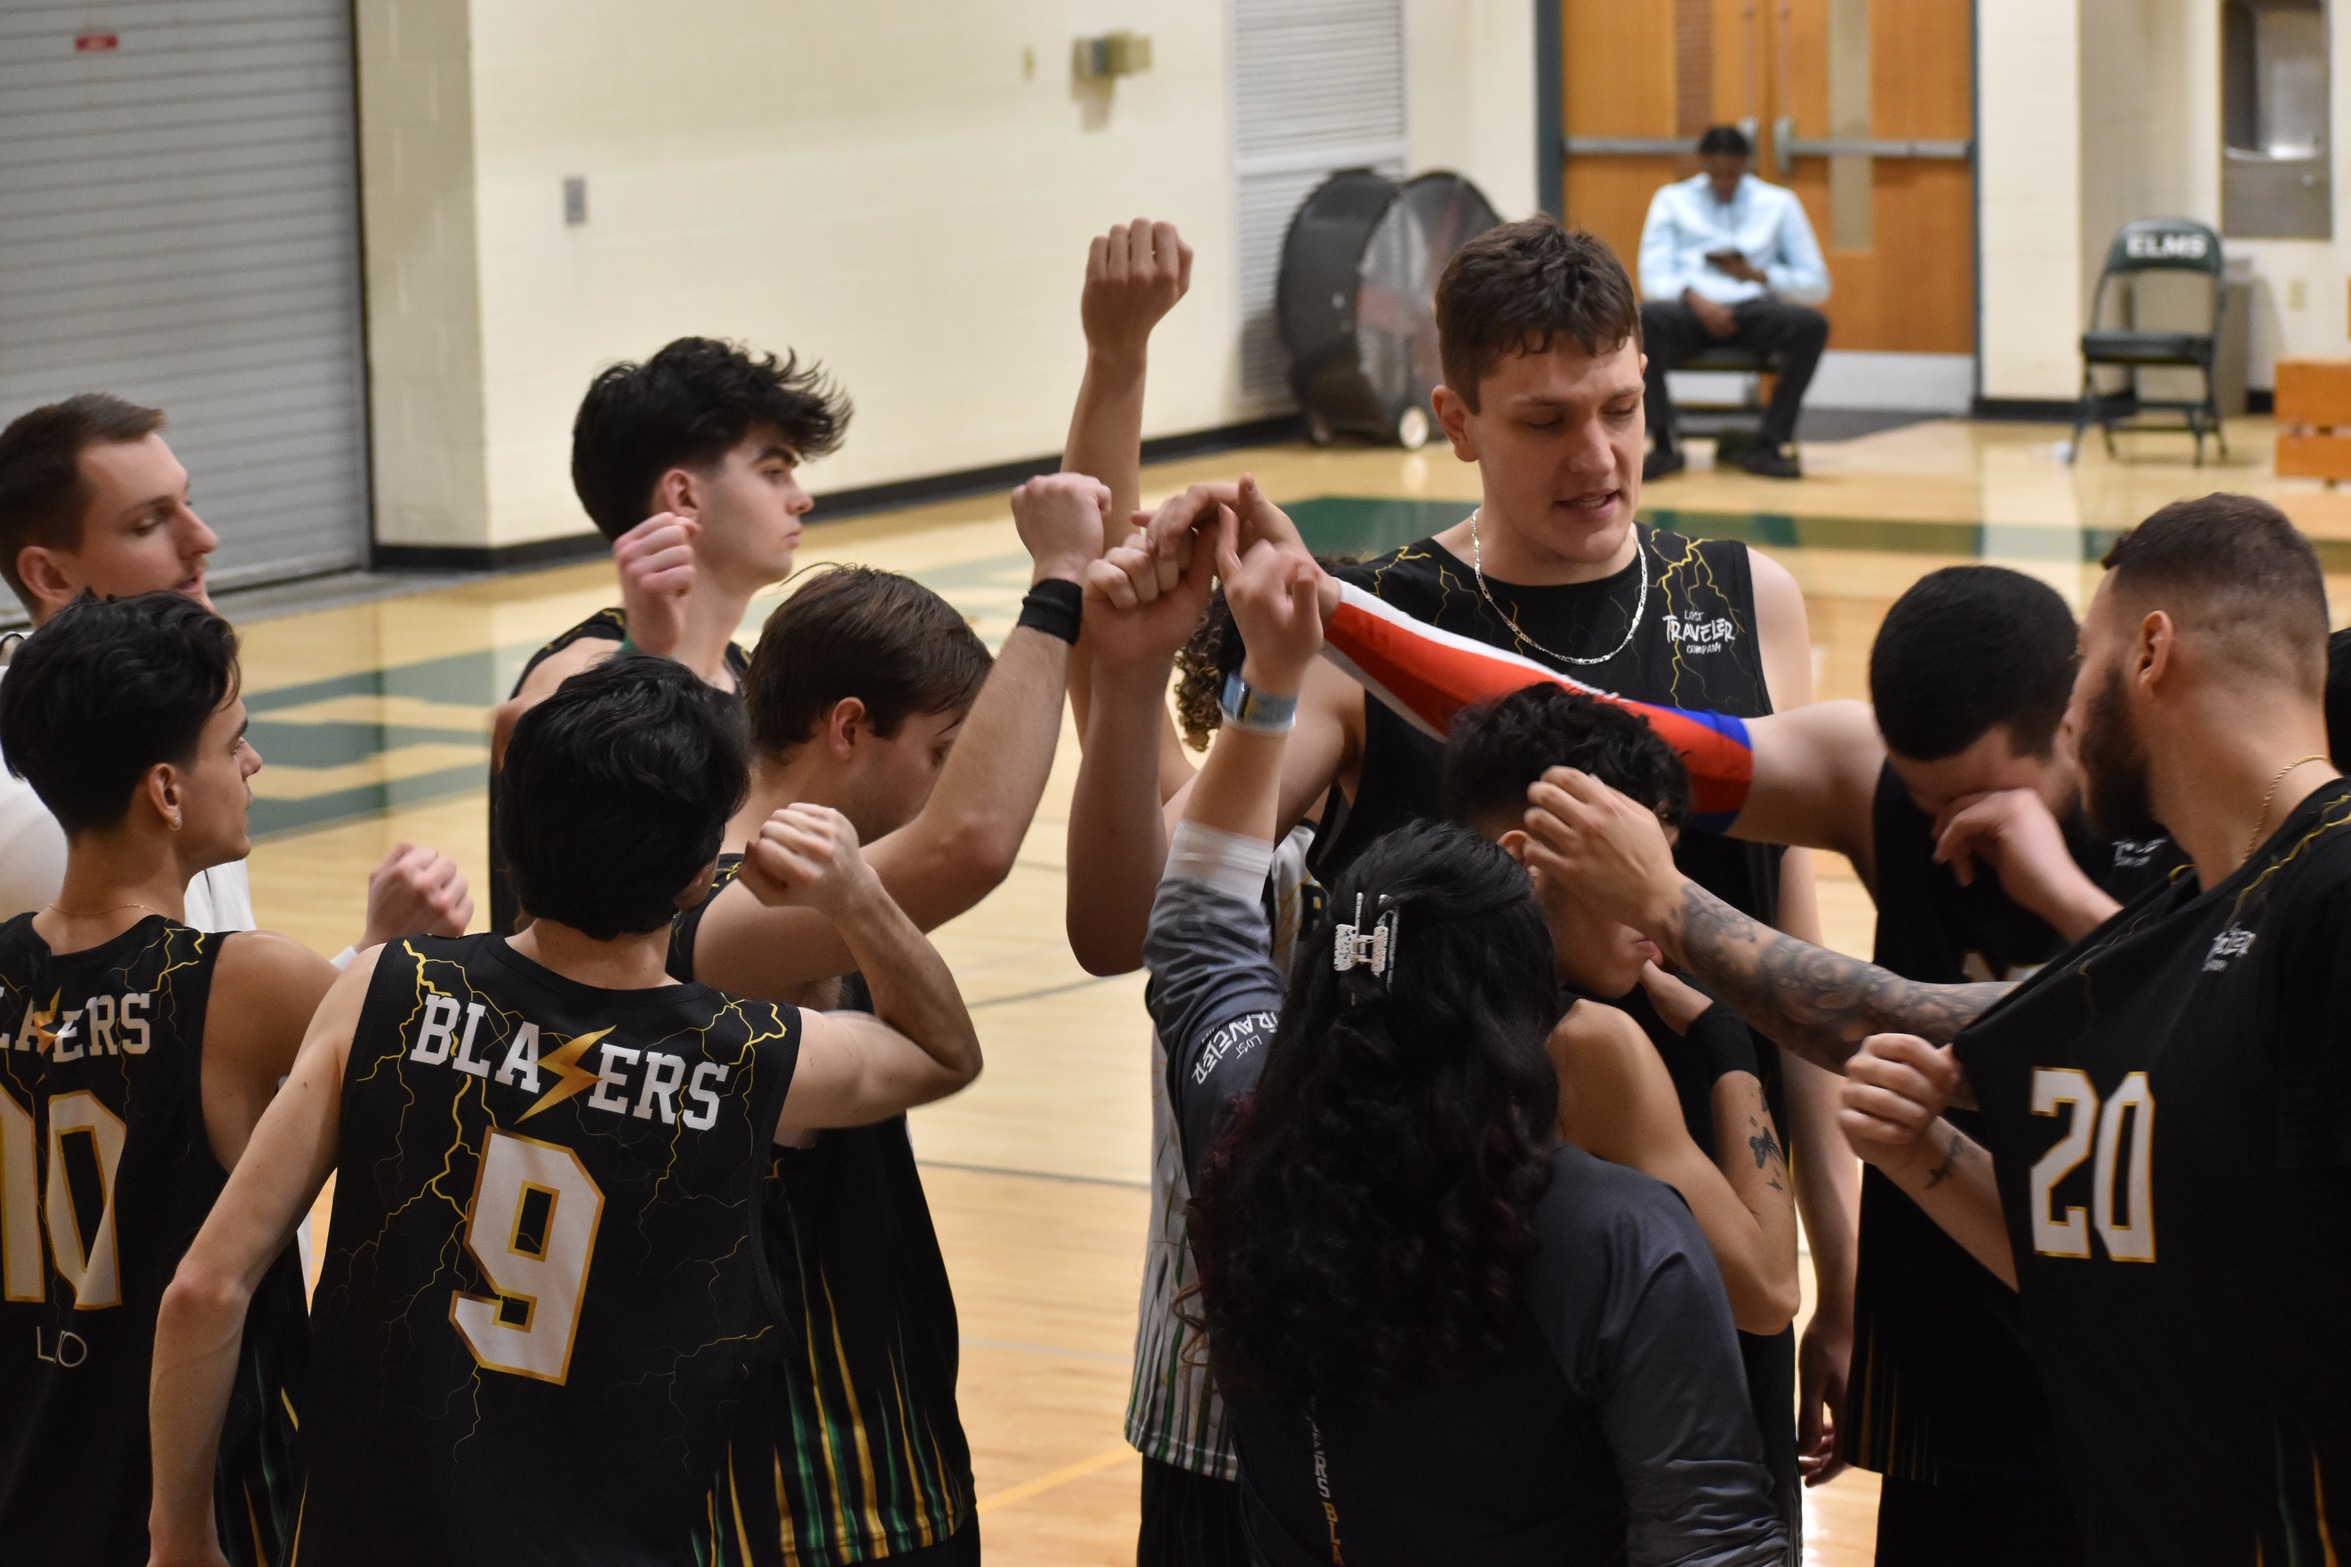 Men's Volleyball Surges to 3-0 Victory Over Chargers